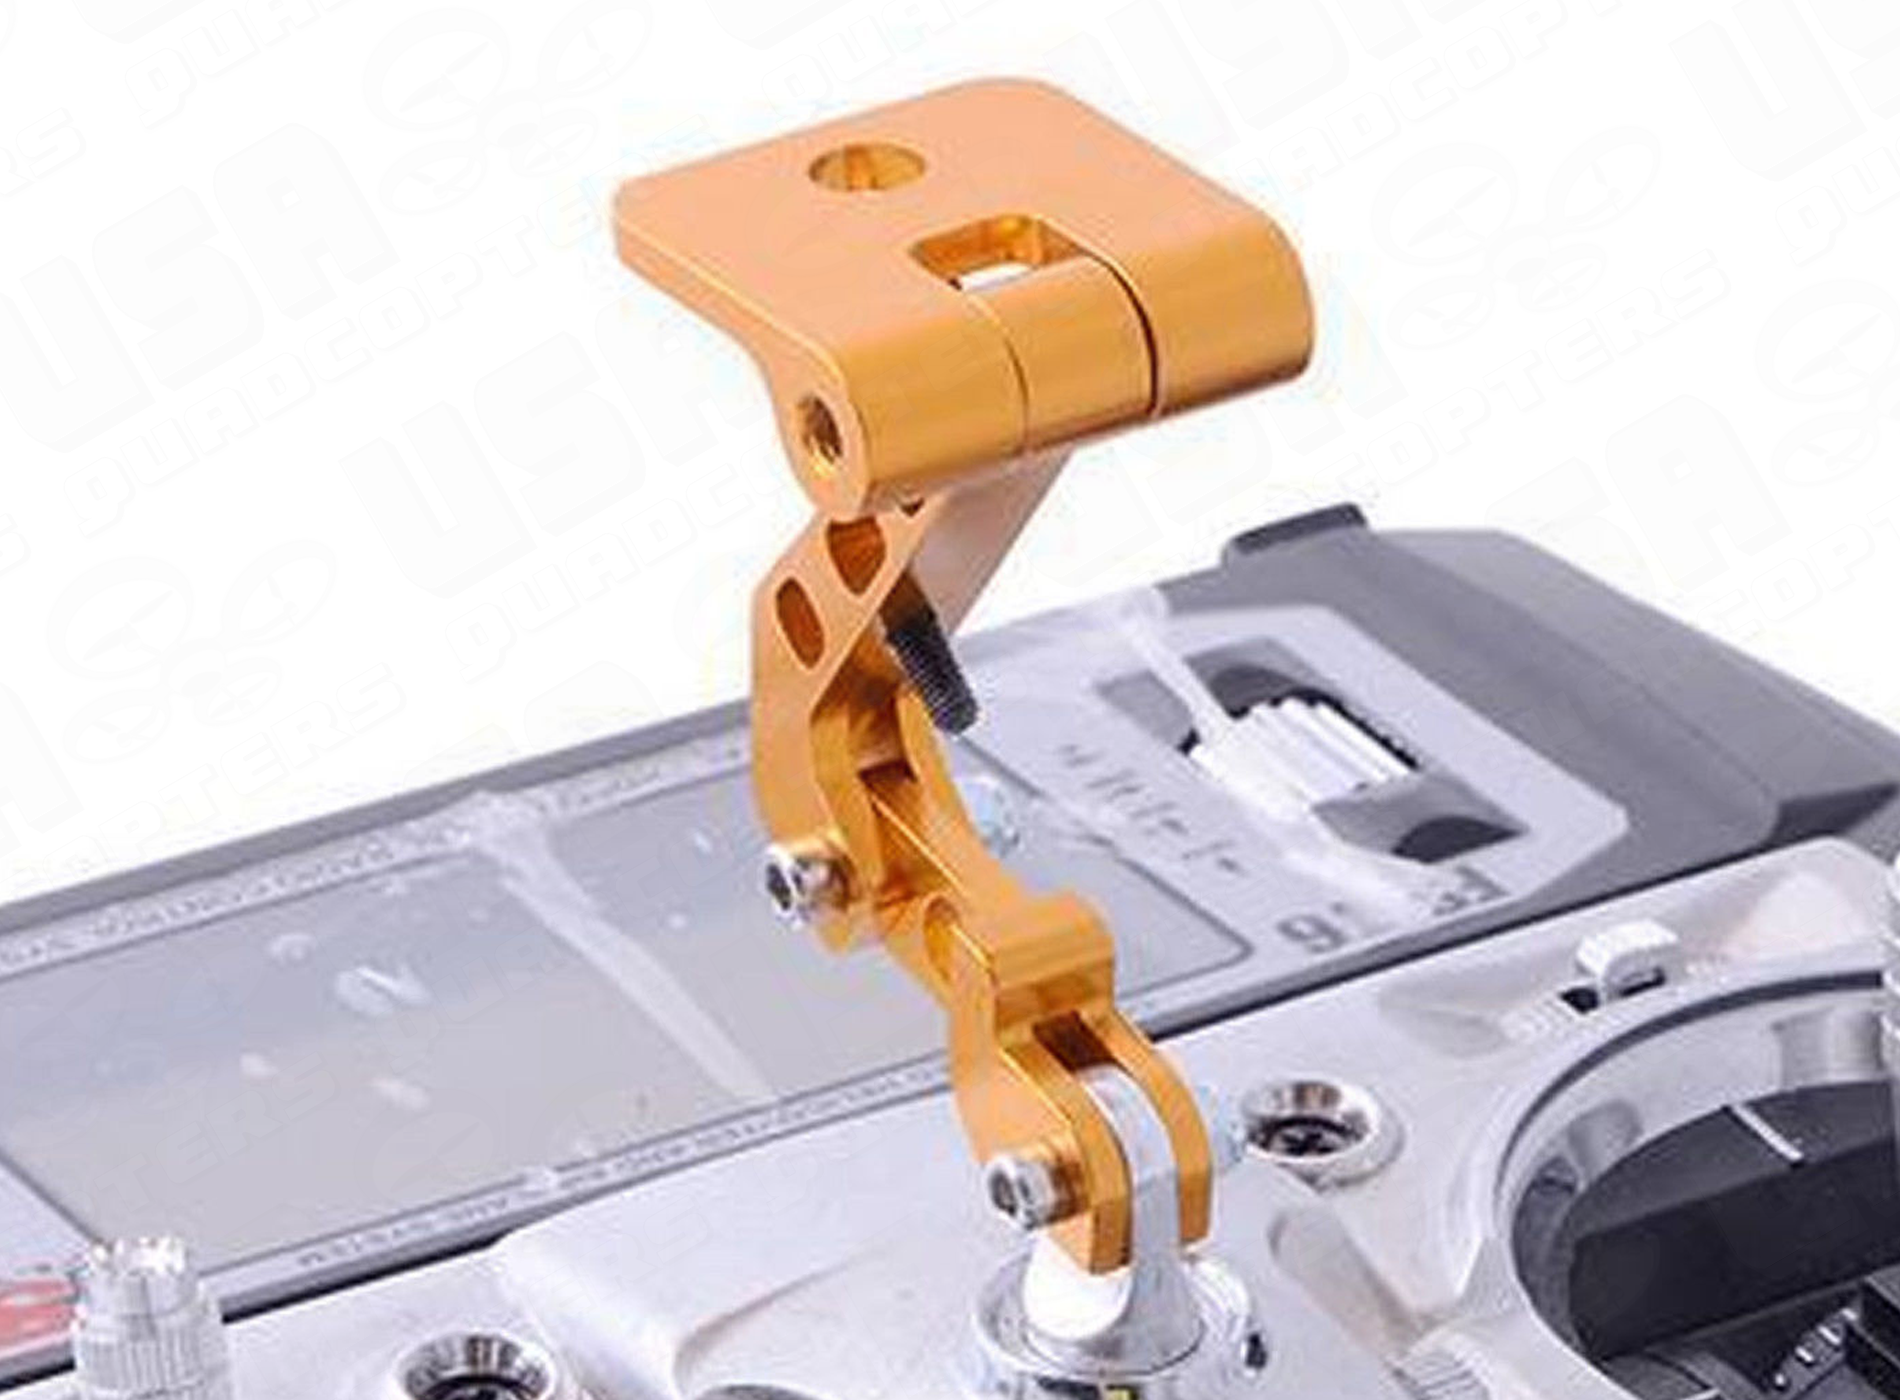 Anodized Aluminum FPV Monitor Bracket Mount for Vertical Adapters